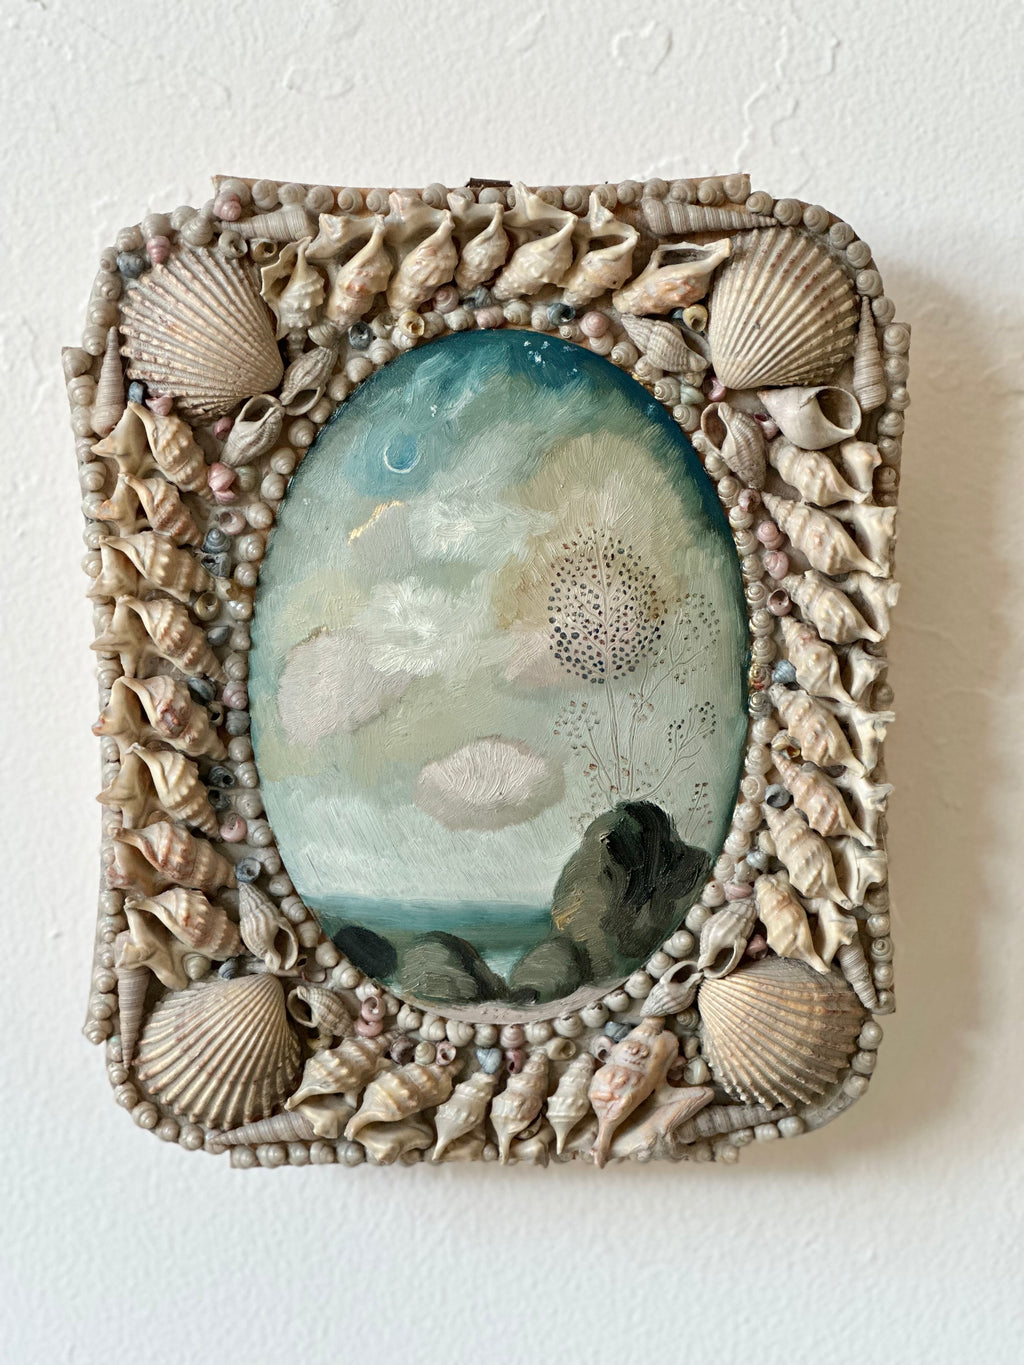 "Otherland View #7" imaginary seascape in vintage seashell frame